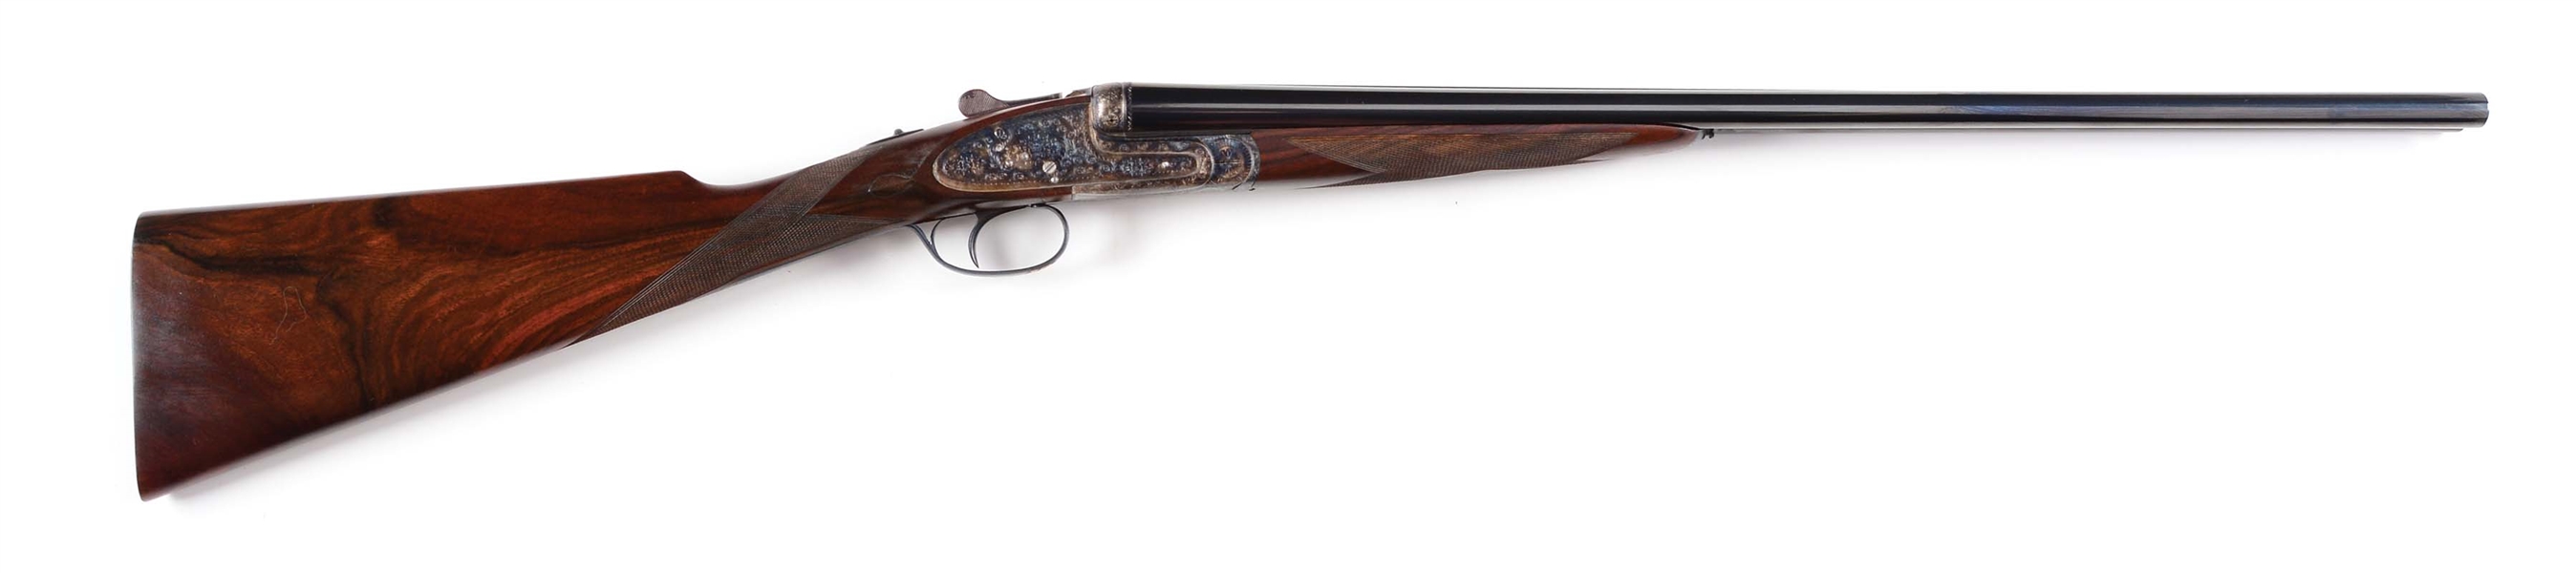 (M) UNION ARMERA (GRULLA) IMPORTED BY LELAND ARMS - 20 GAUGE MODEL 216 WITH SPECIAL ORDER FEATURES  